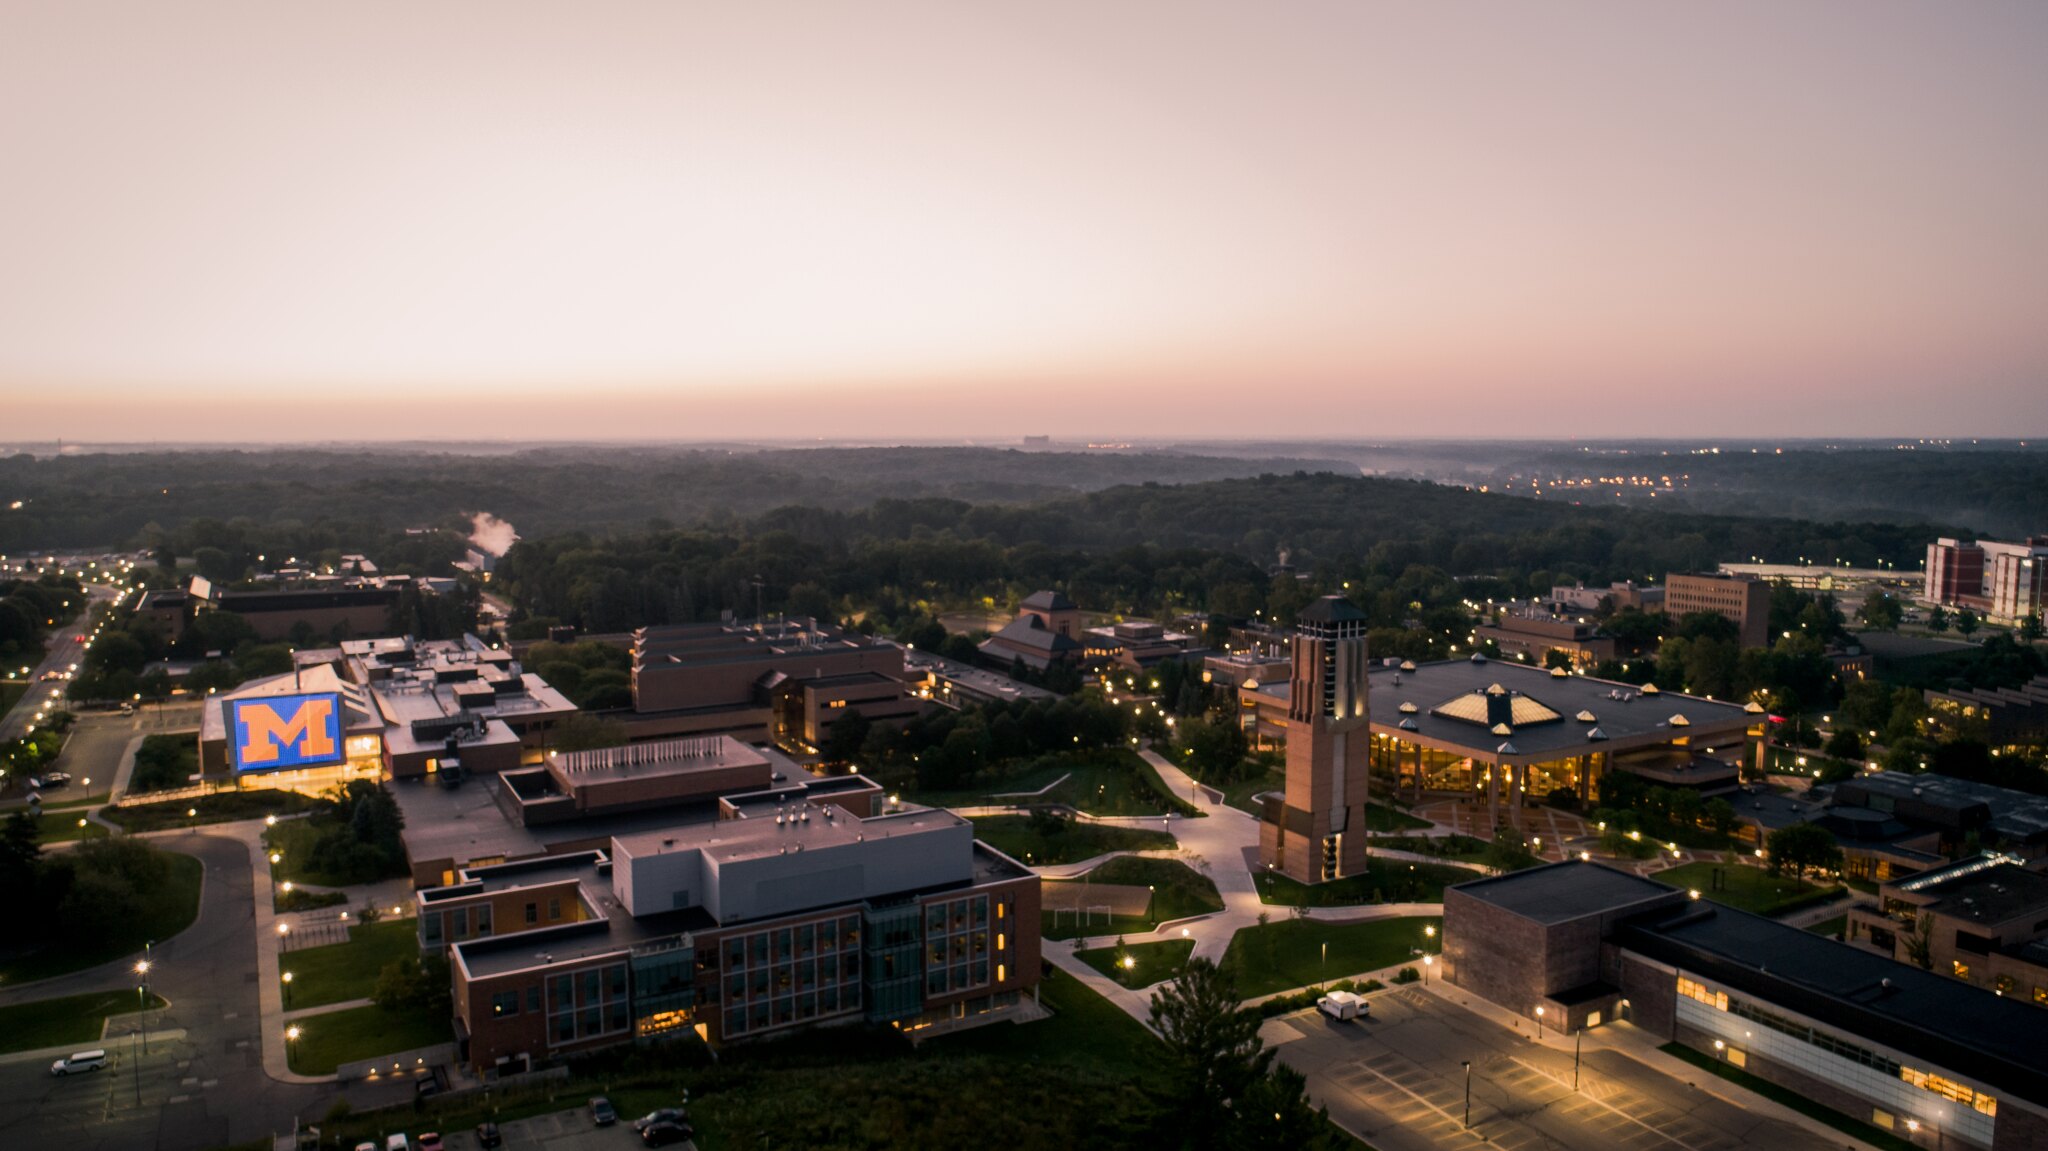 Aerial view of University of Michigan North Campus at sunset